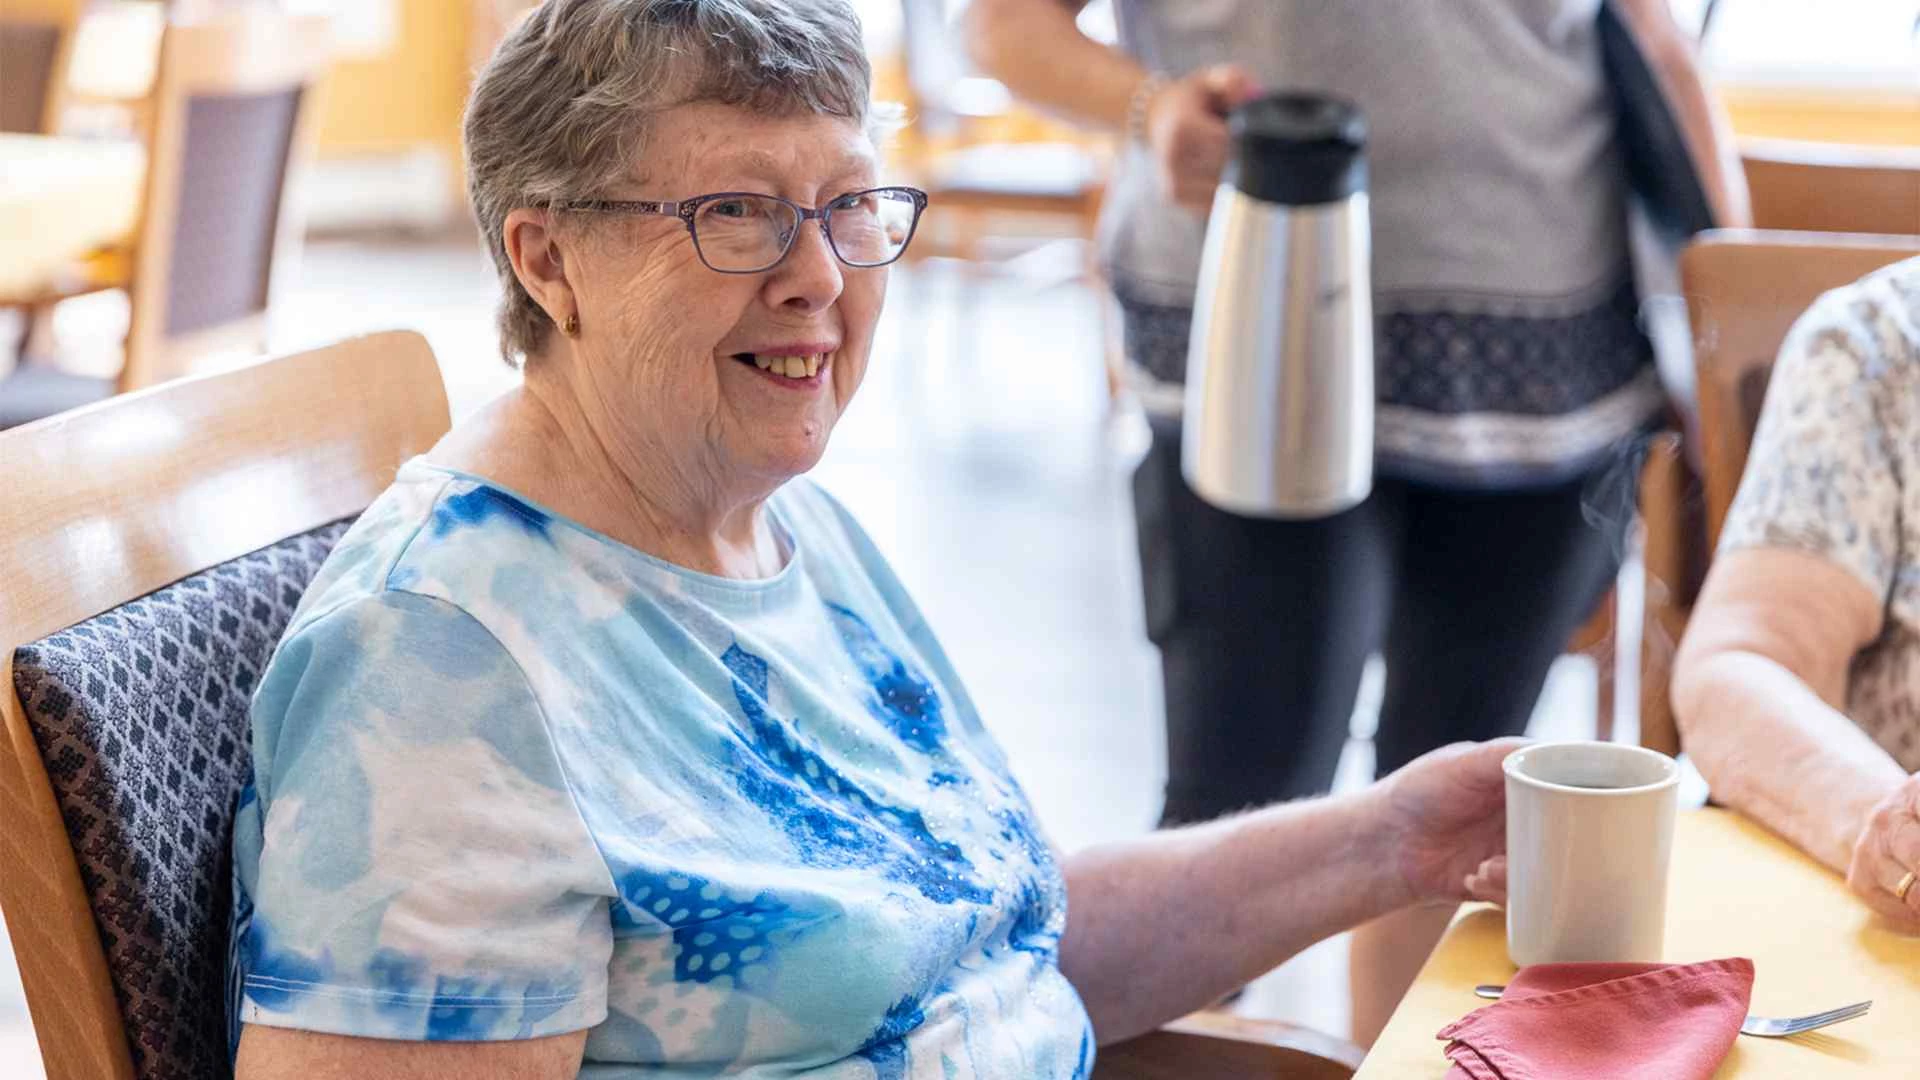 A senior citizen smiling and drinking coffee